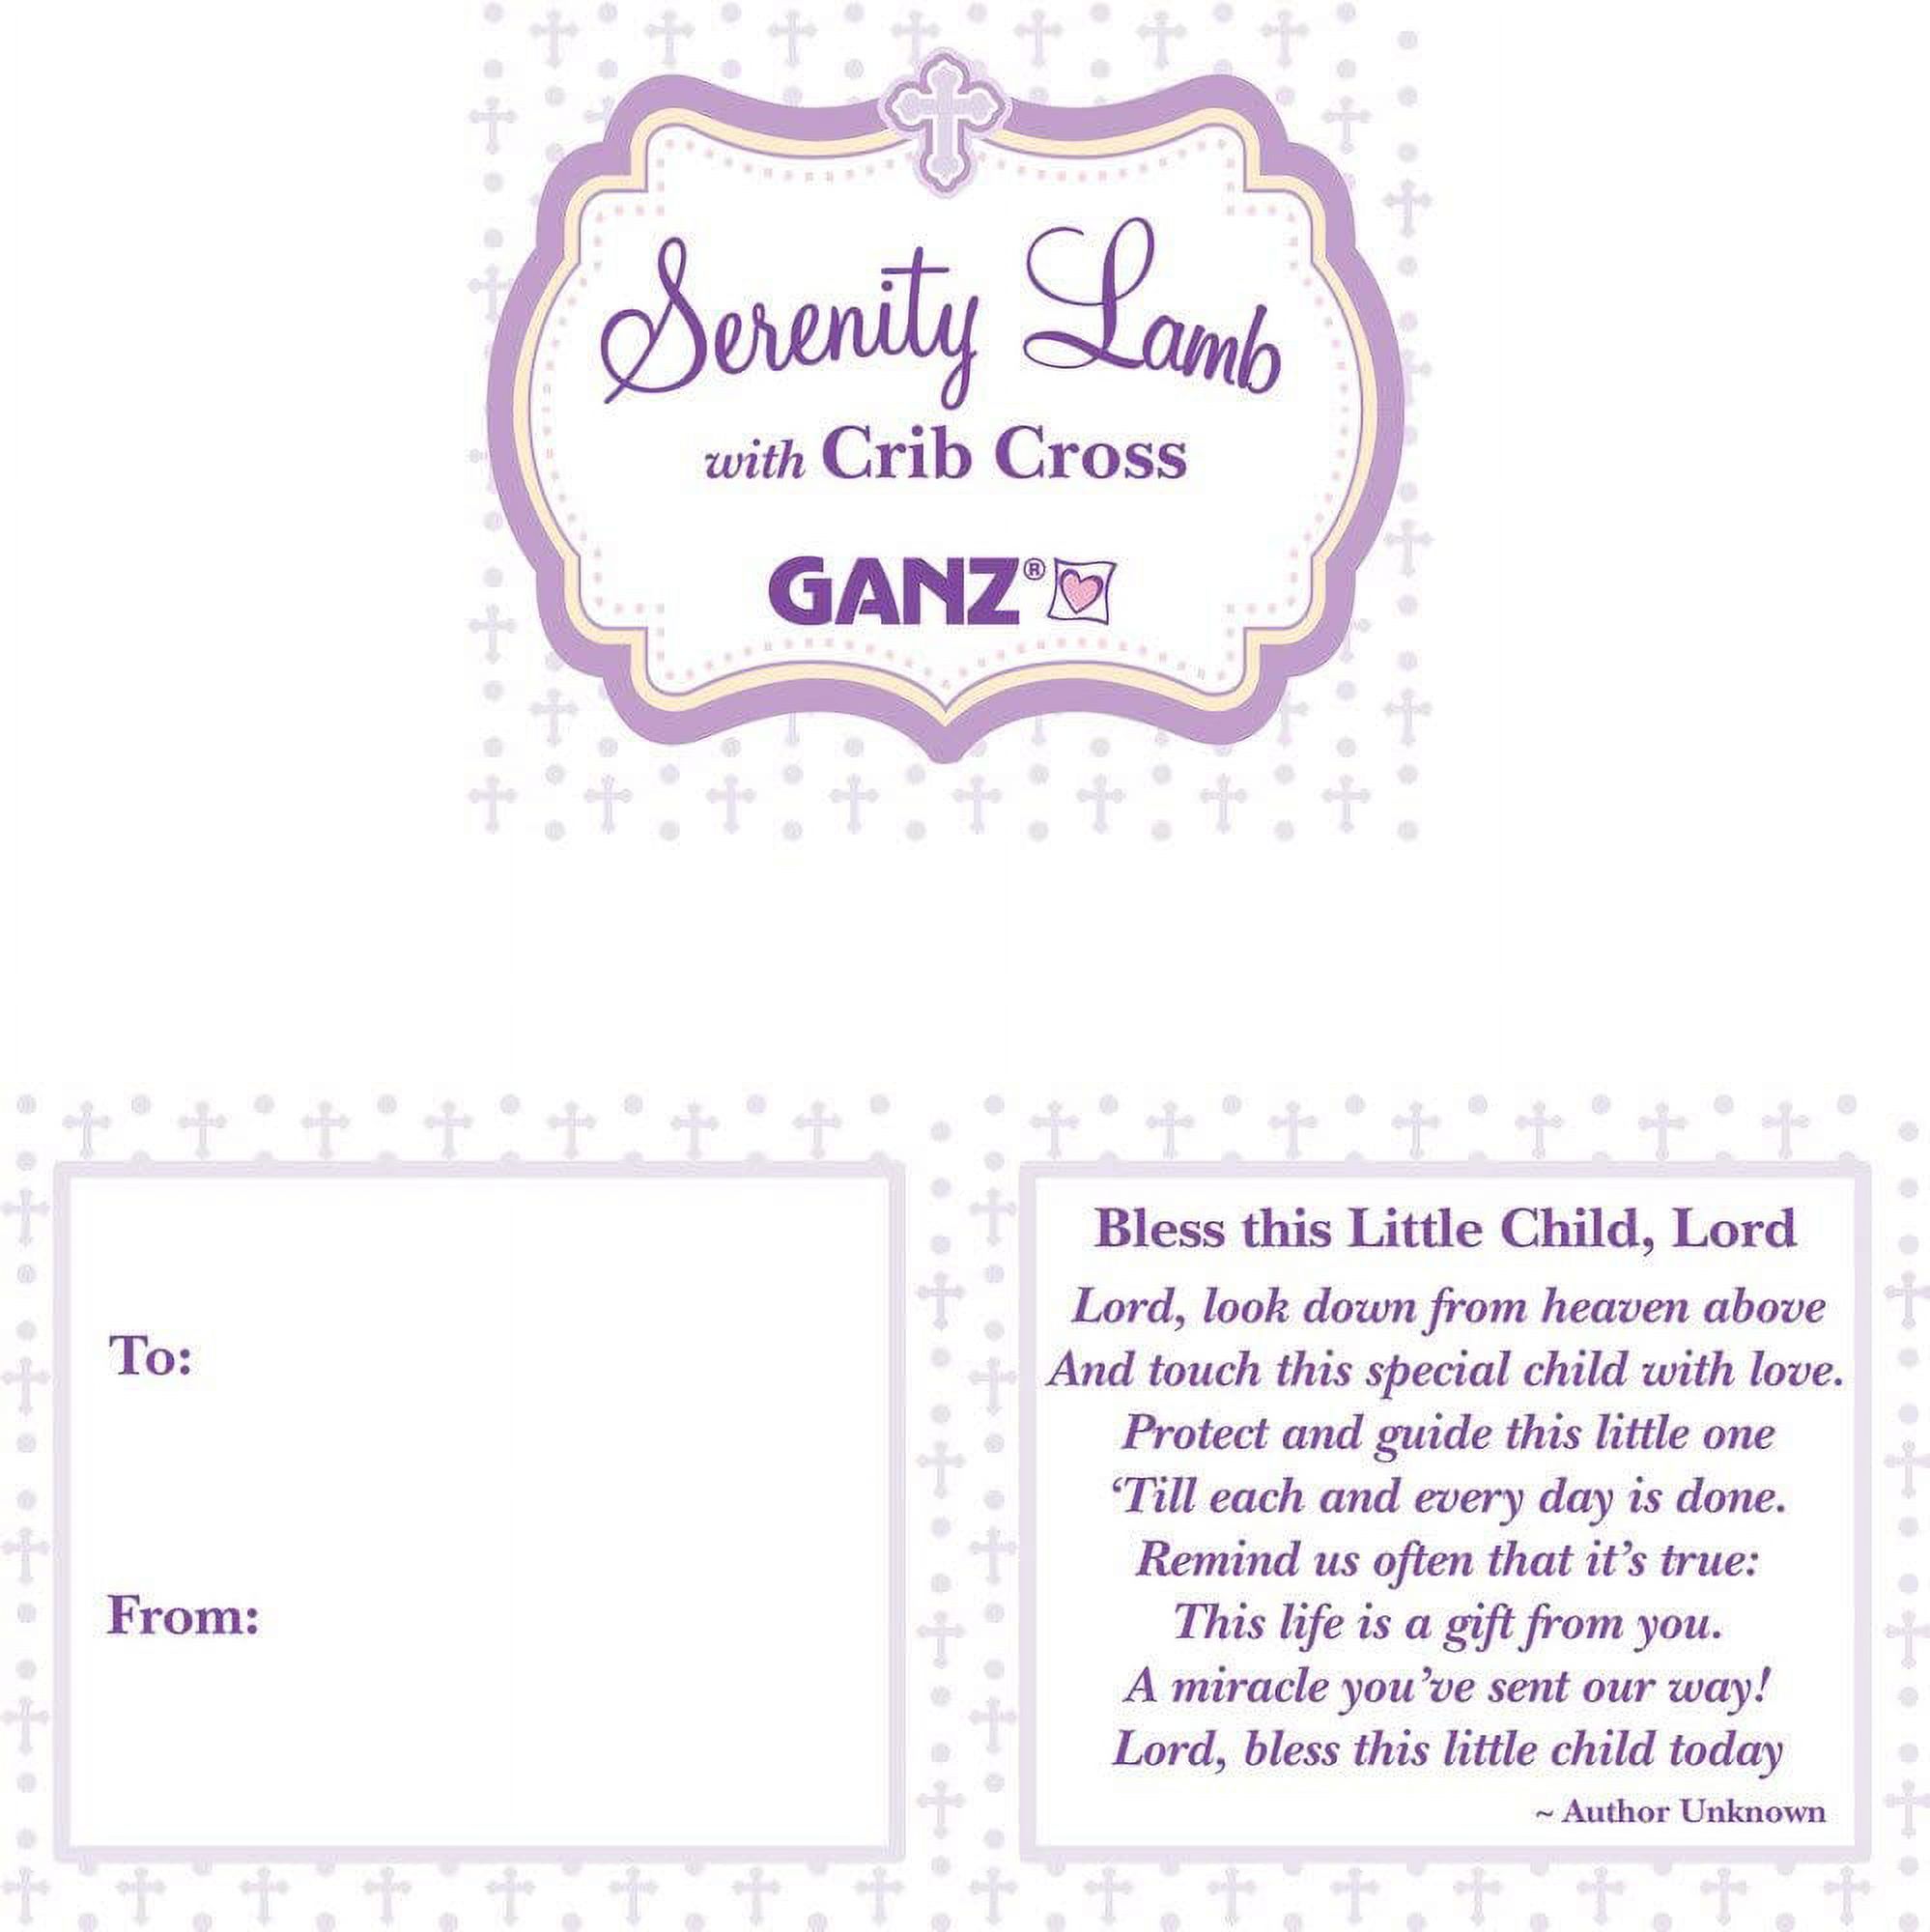 Ganz Serenity Lamb With Crib Cross Christening or Baptism Gift (Pink (Girl)) - image 2 of 2